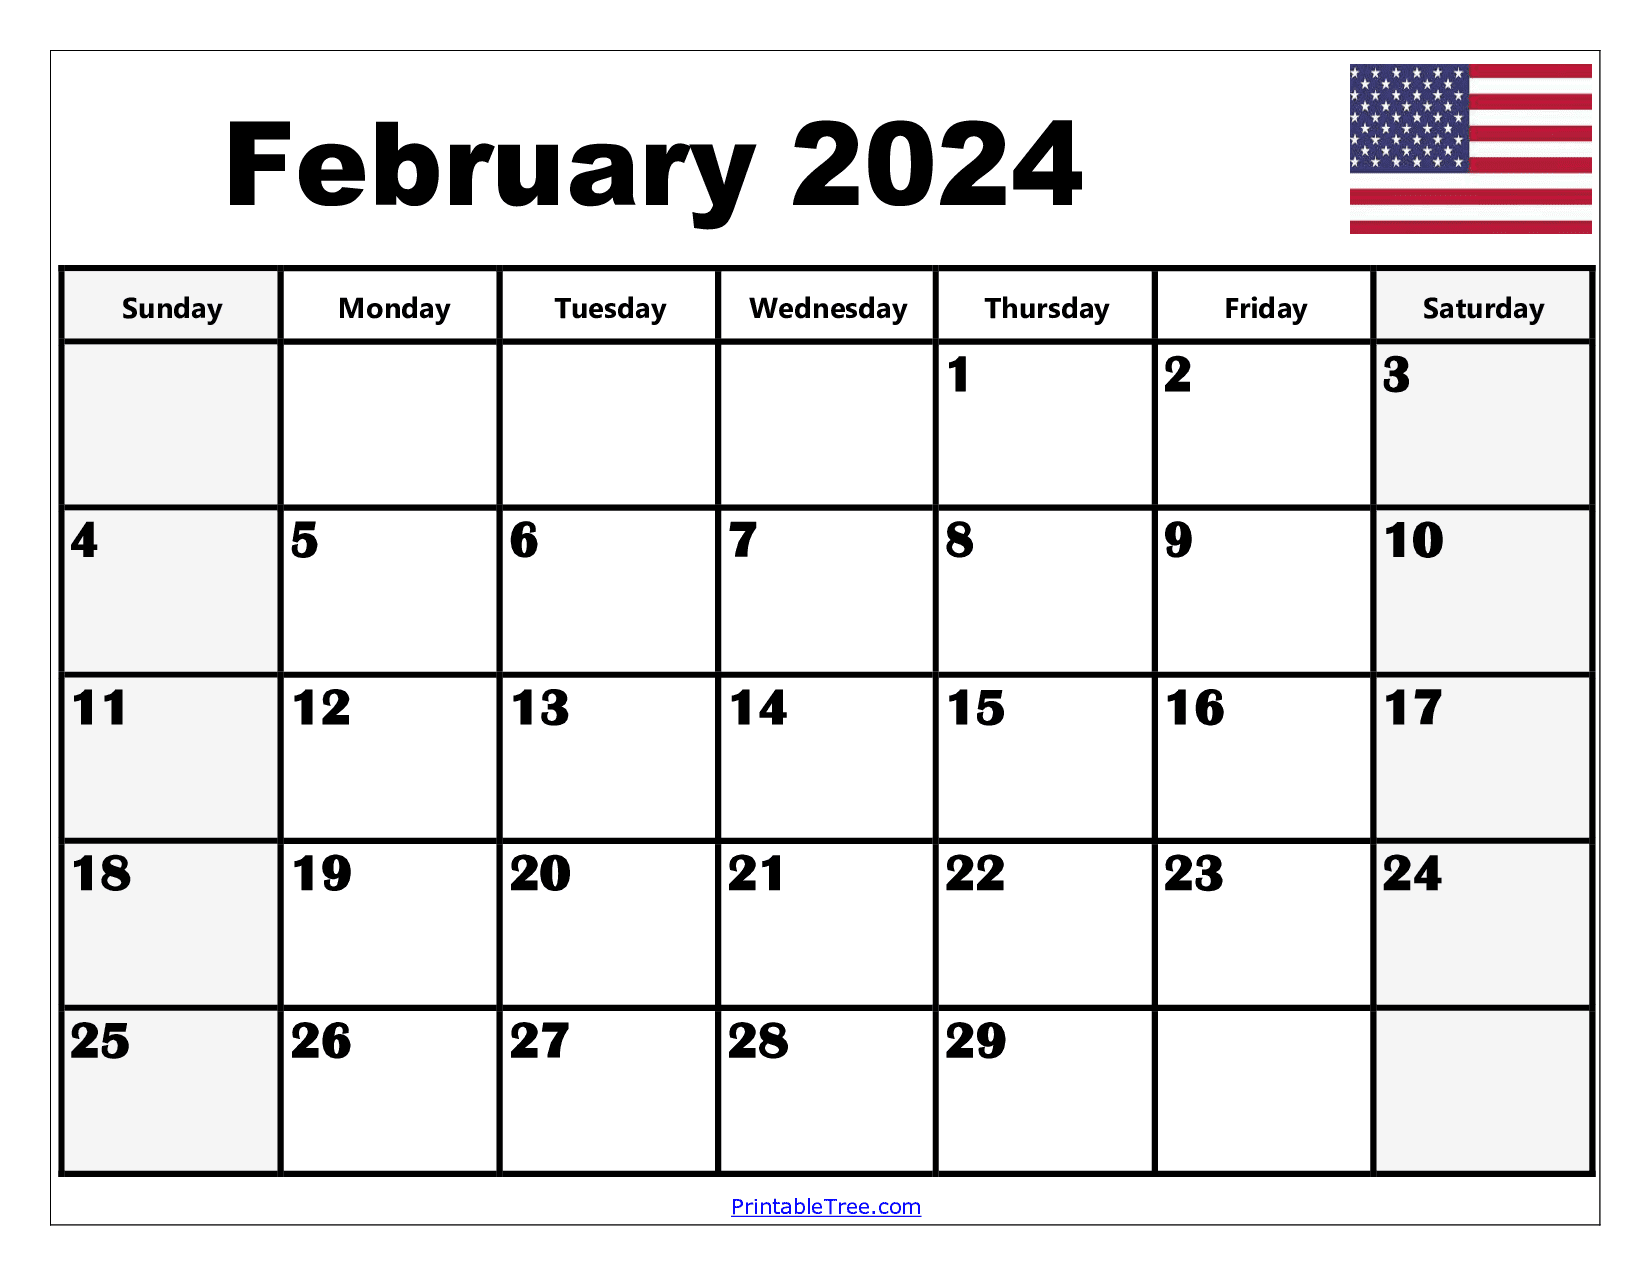 February 2024 Calendar Printable Pdf Template With Holidays for Free Printable February 2024 Monthly Calendar With Holidays